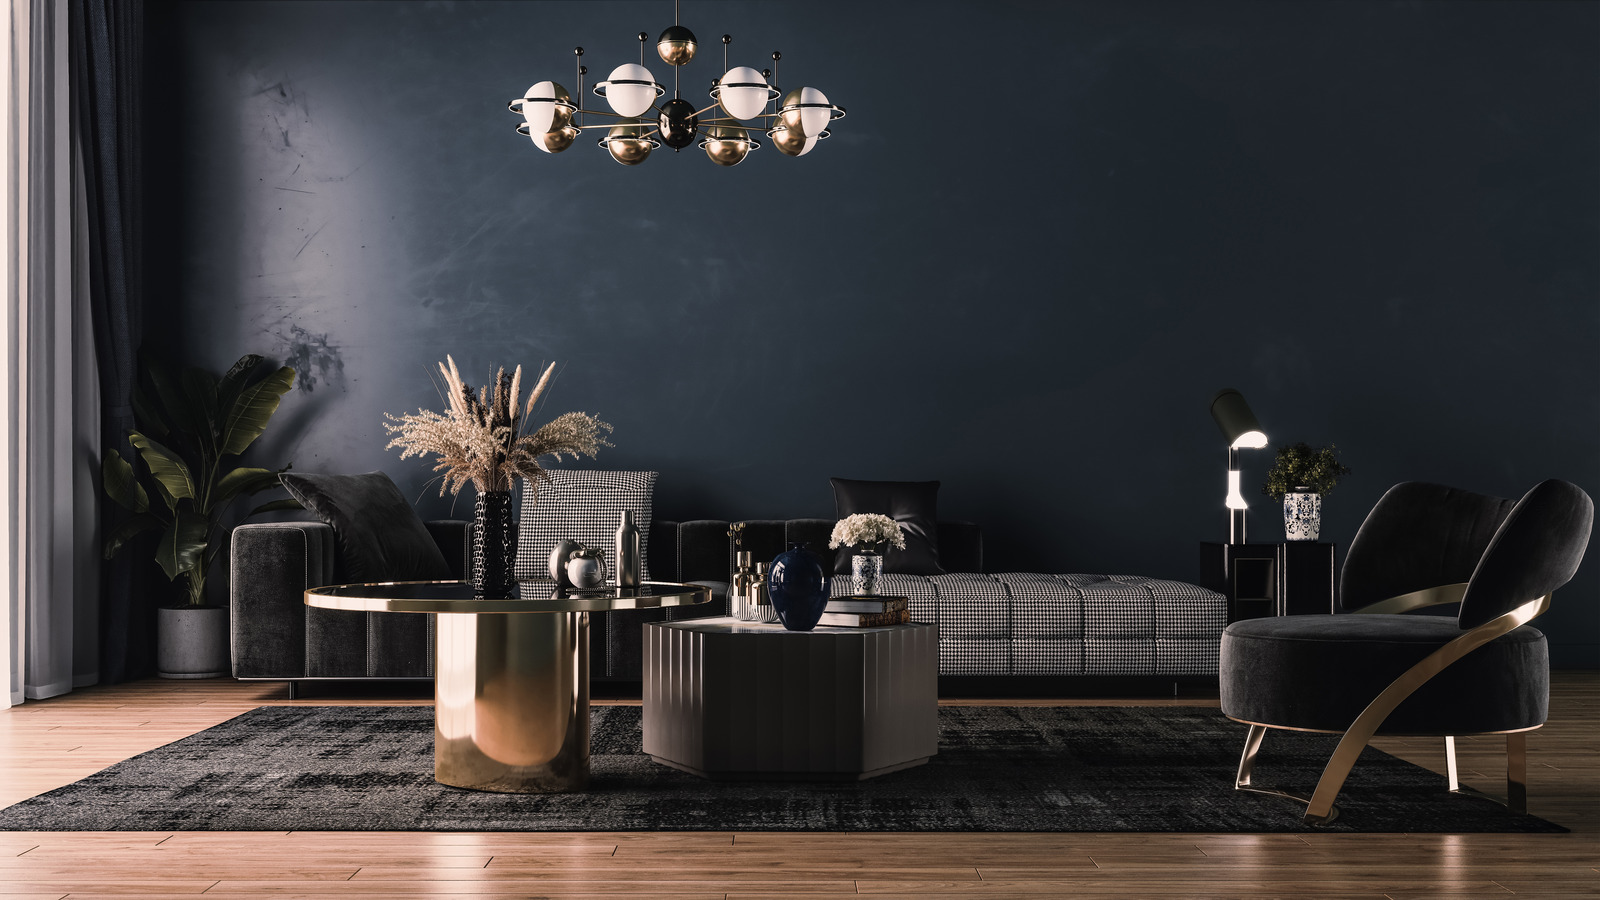 What you need to know before you paint a room all black - Stefana